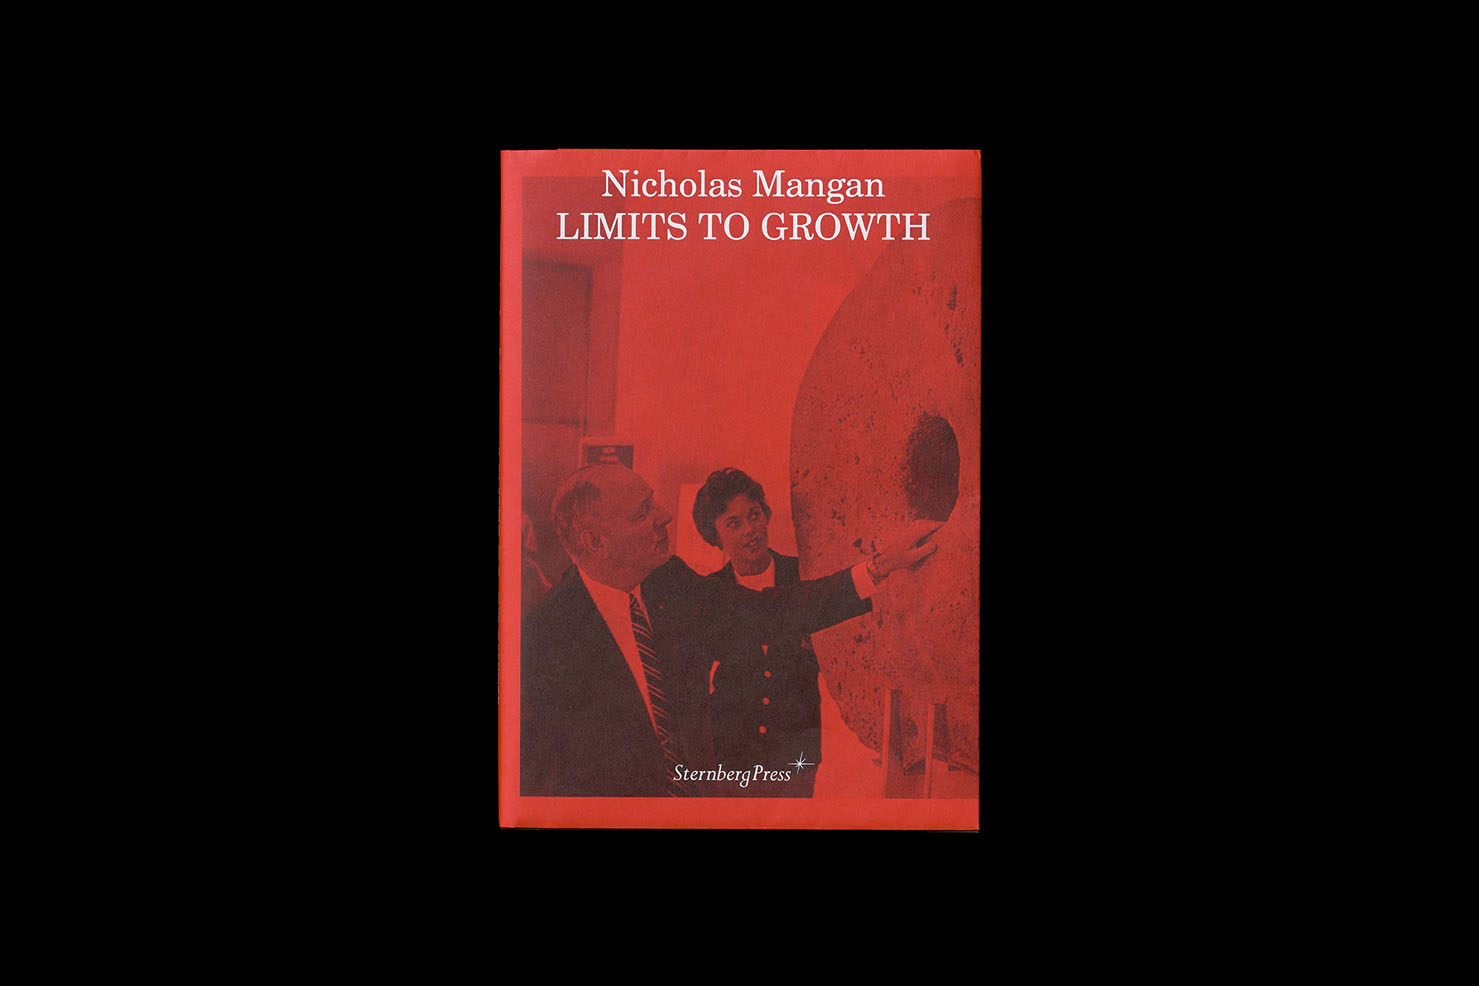 Nicholas Mangan: Limits to Growth. Softcover, 246 pp + 2 inserts, offset, edition of 1500, 170 x 240 mm. Design by Žiga Testen. ISBN 978-3-95679-252-6. Copublished with the Institute of Modern Art, Brisbane; KW Institute for Contemporary Art, Berlin; and Monash University Museum of Art, Melbourne